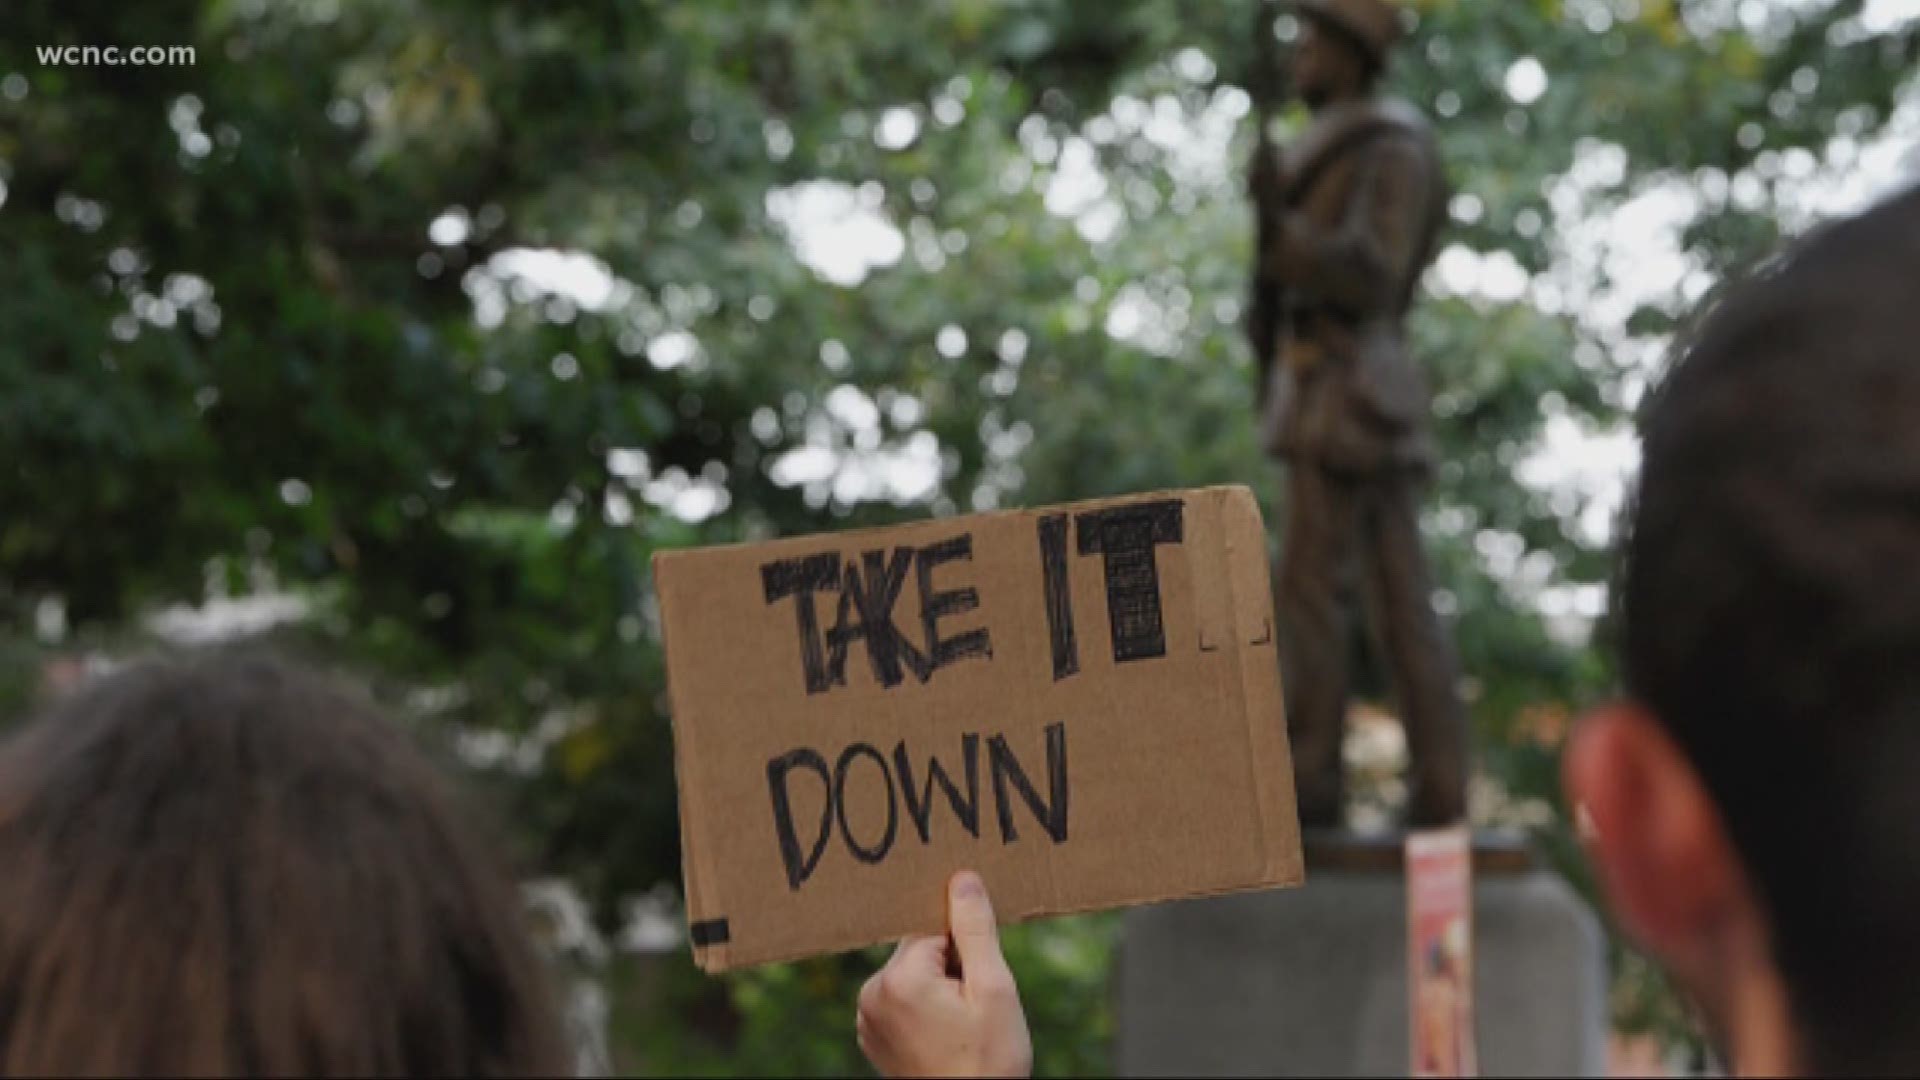 The UNC board of trustees met Tuesday to decide what is next after the statue was brought down by protestors